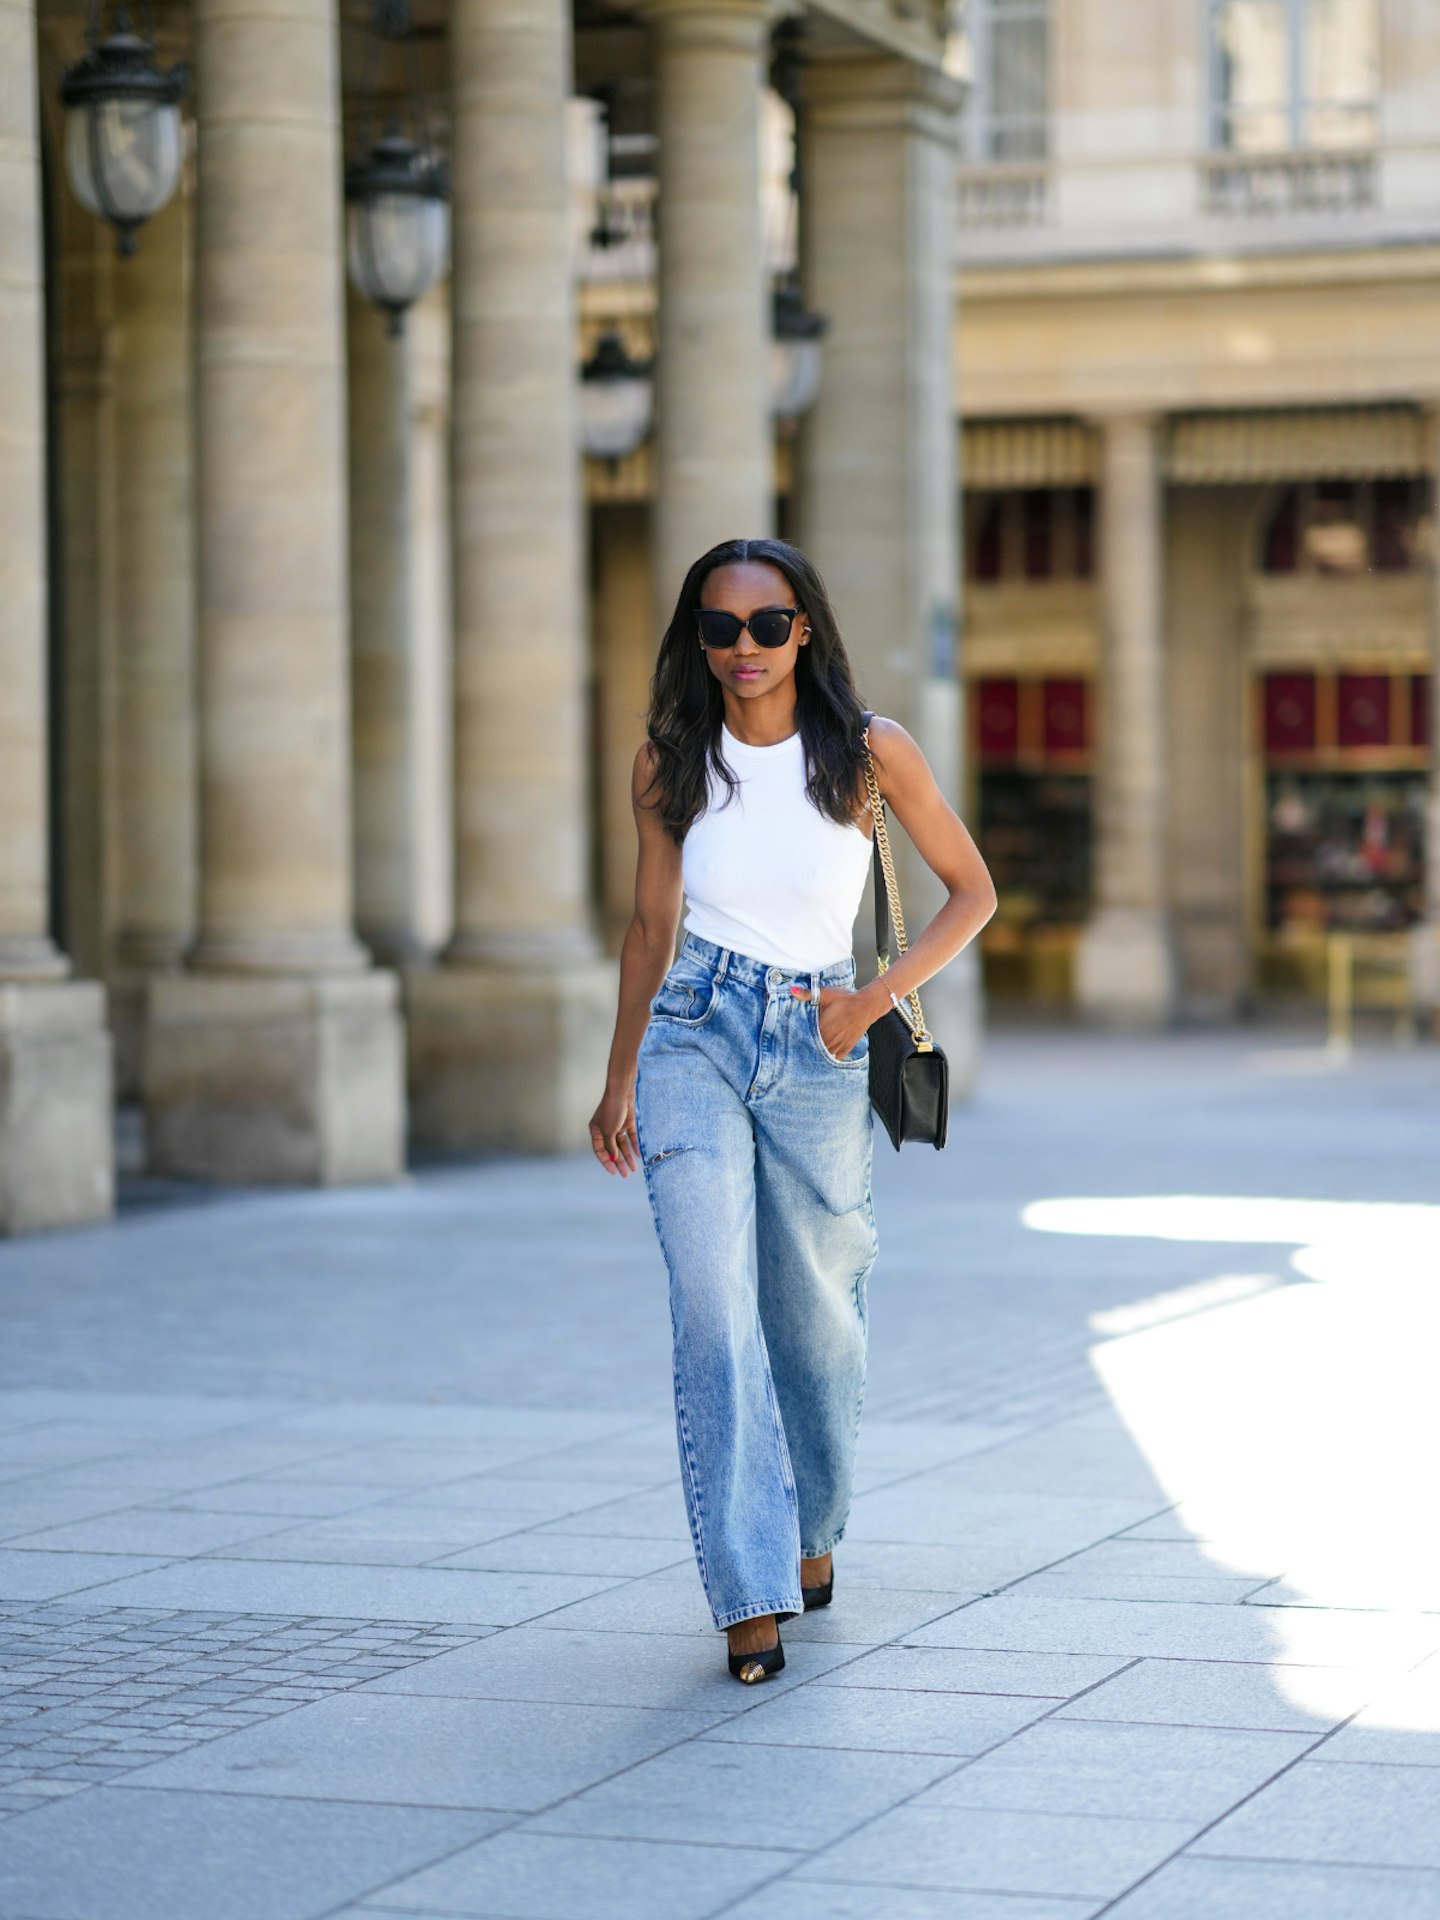 The Best Jeans to Wear for a Pear Shape Body